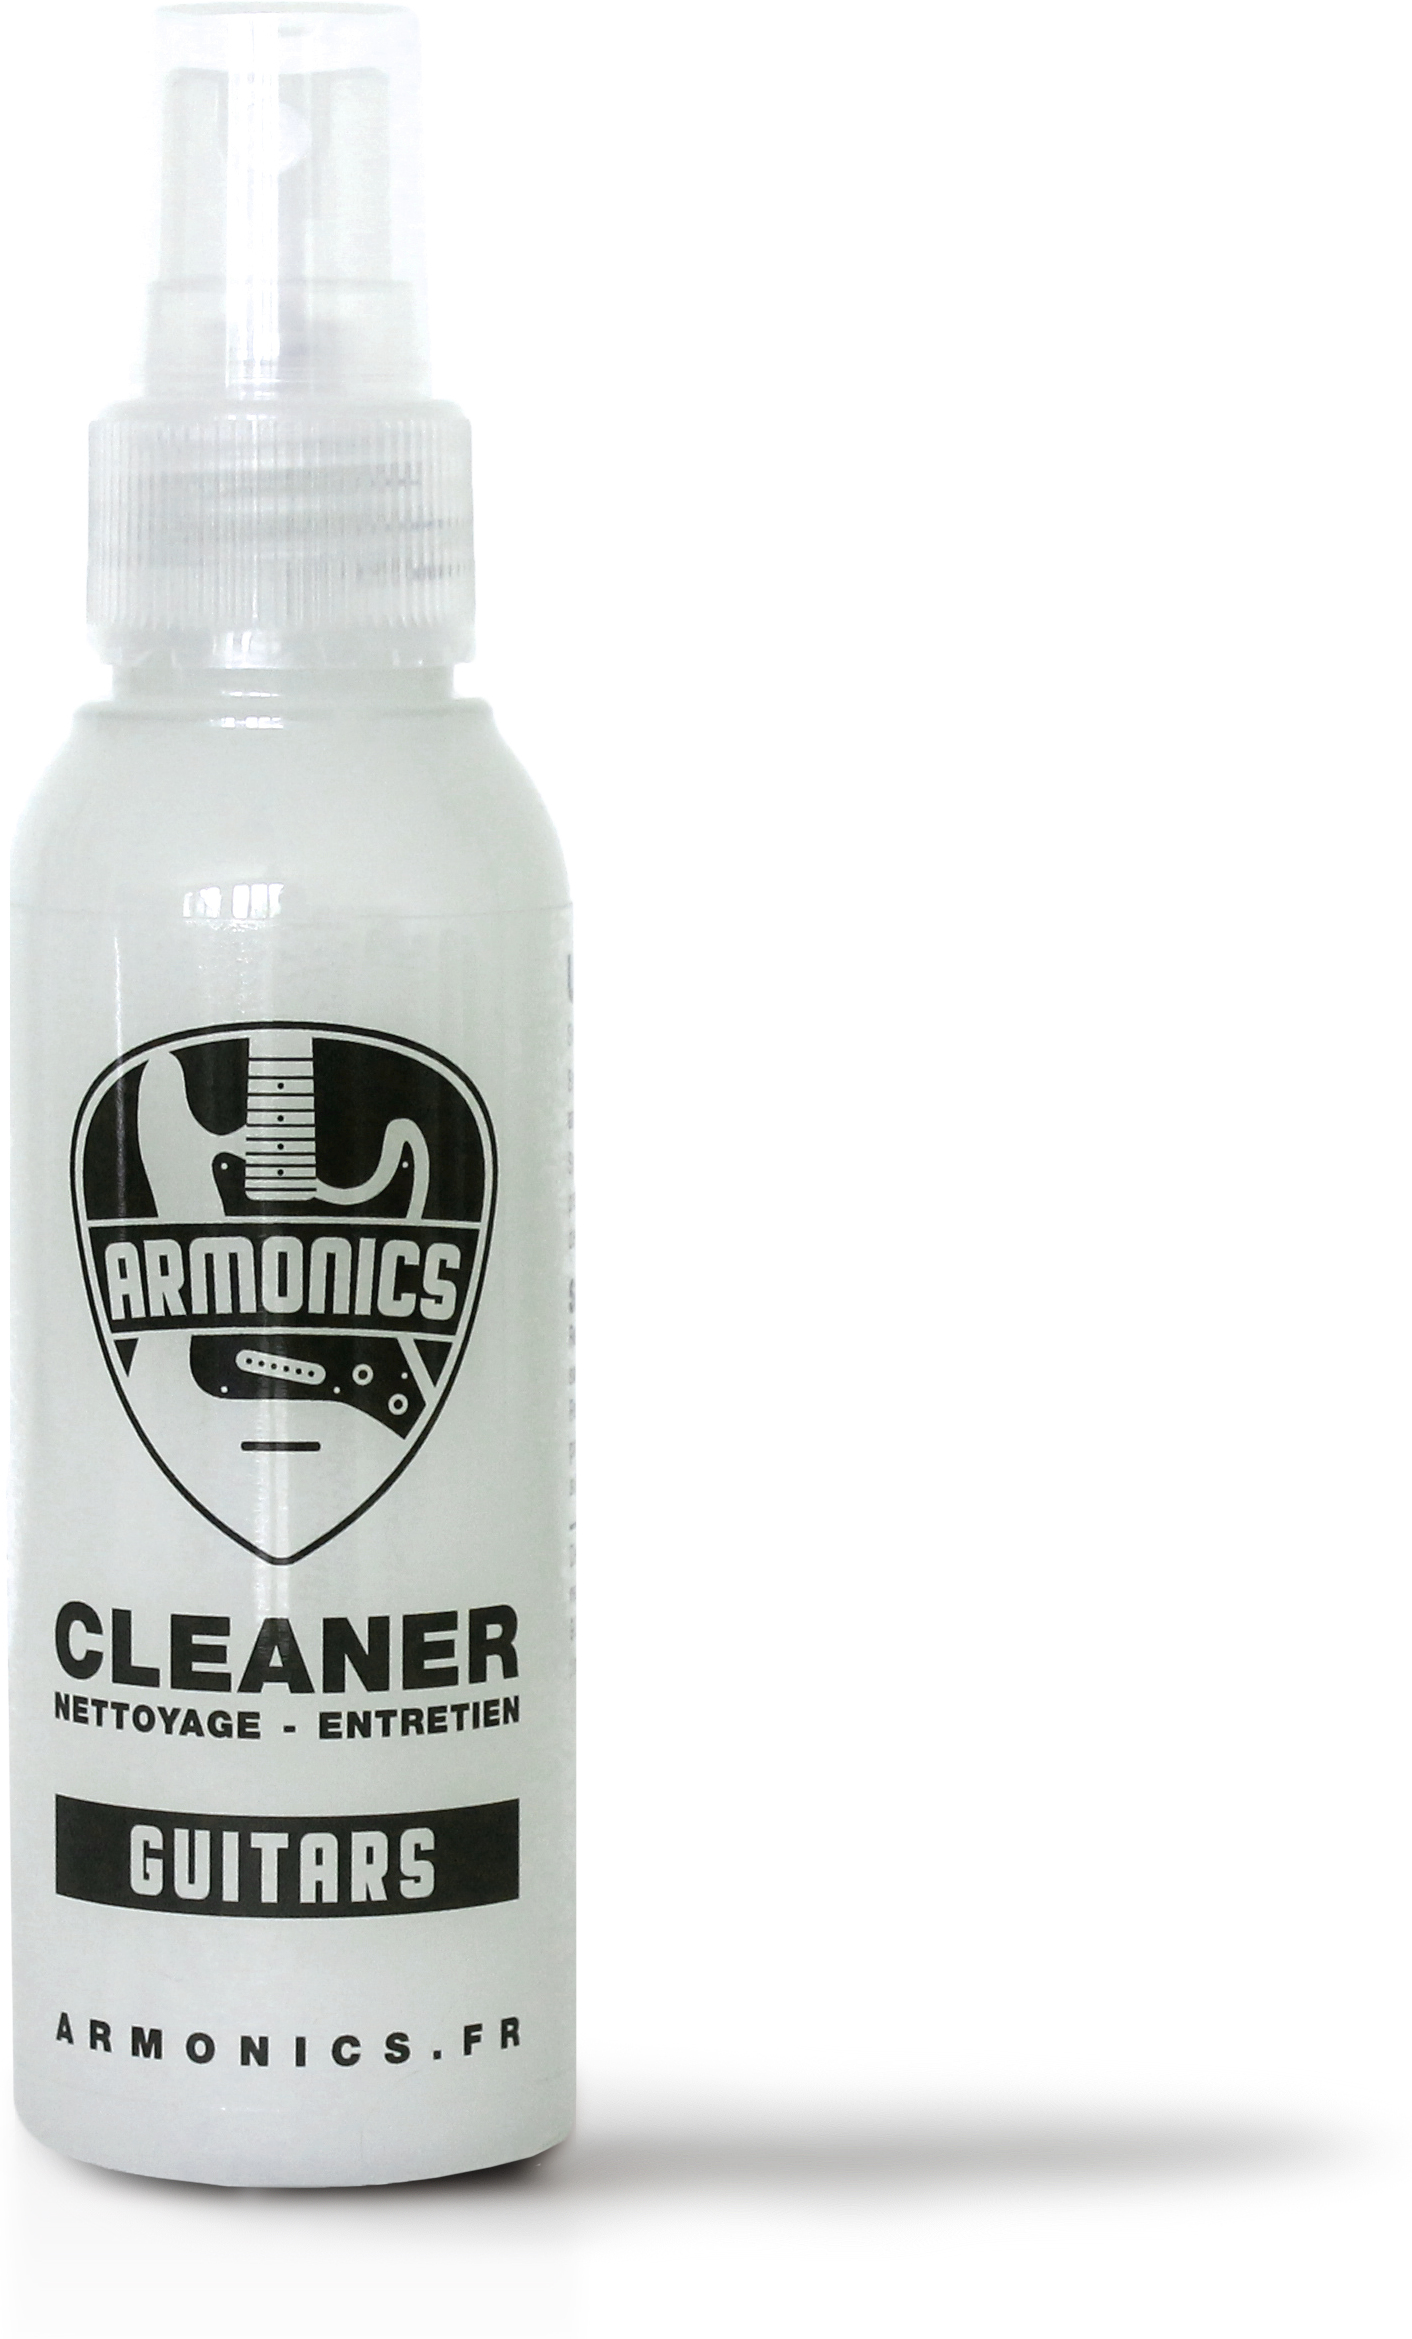 Armonics Cleaner - Care & Cleaning Gitarre - Main picture